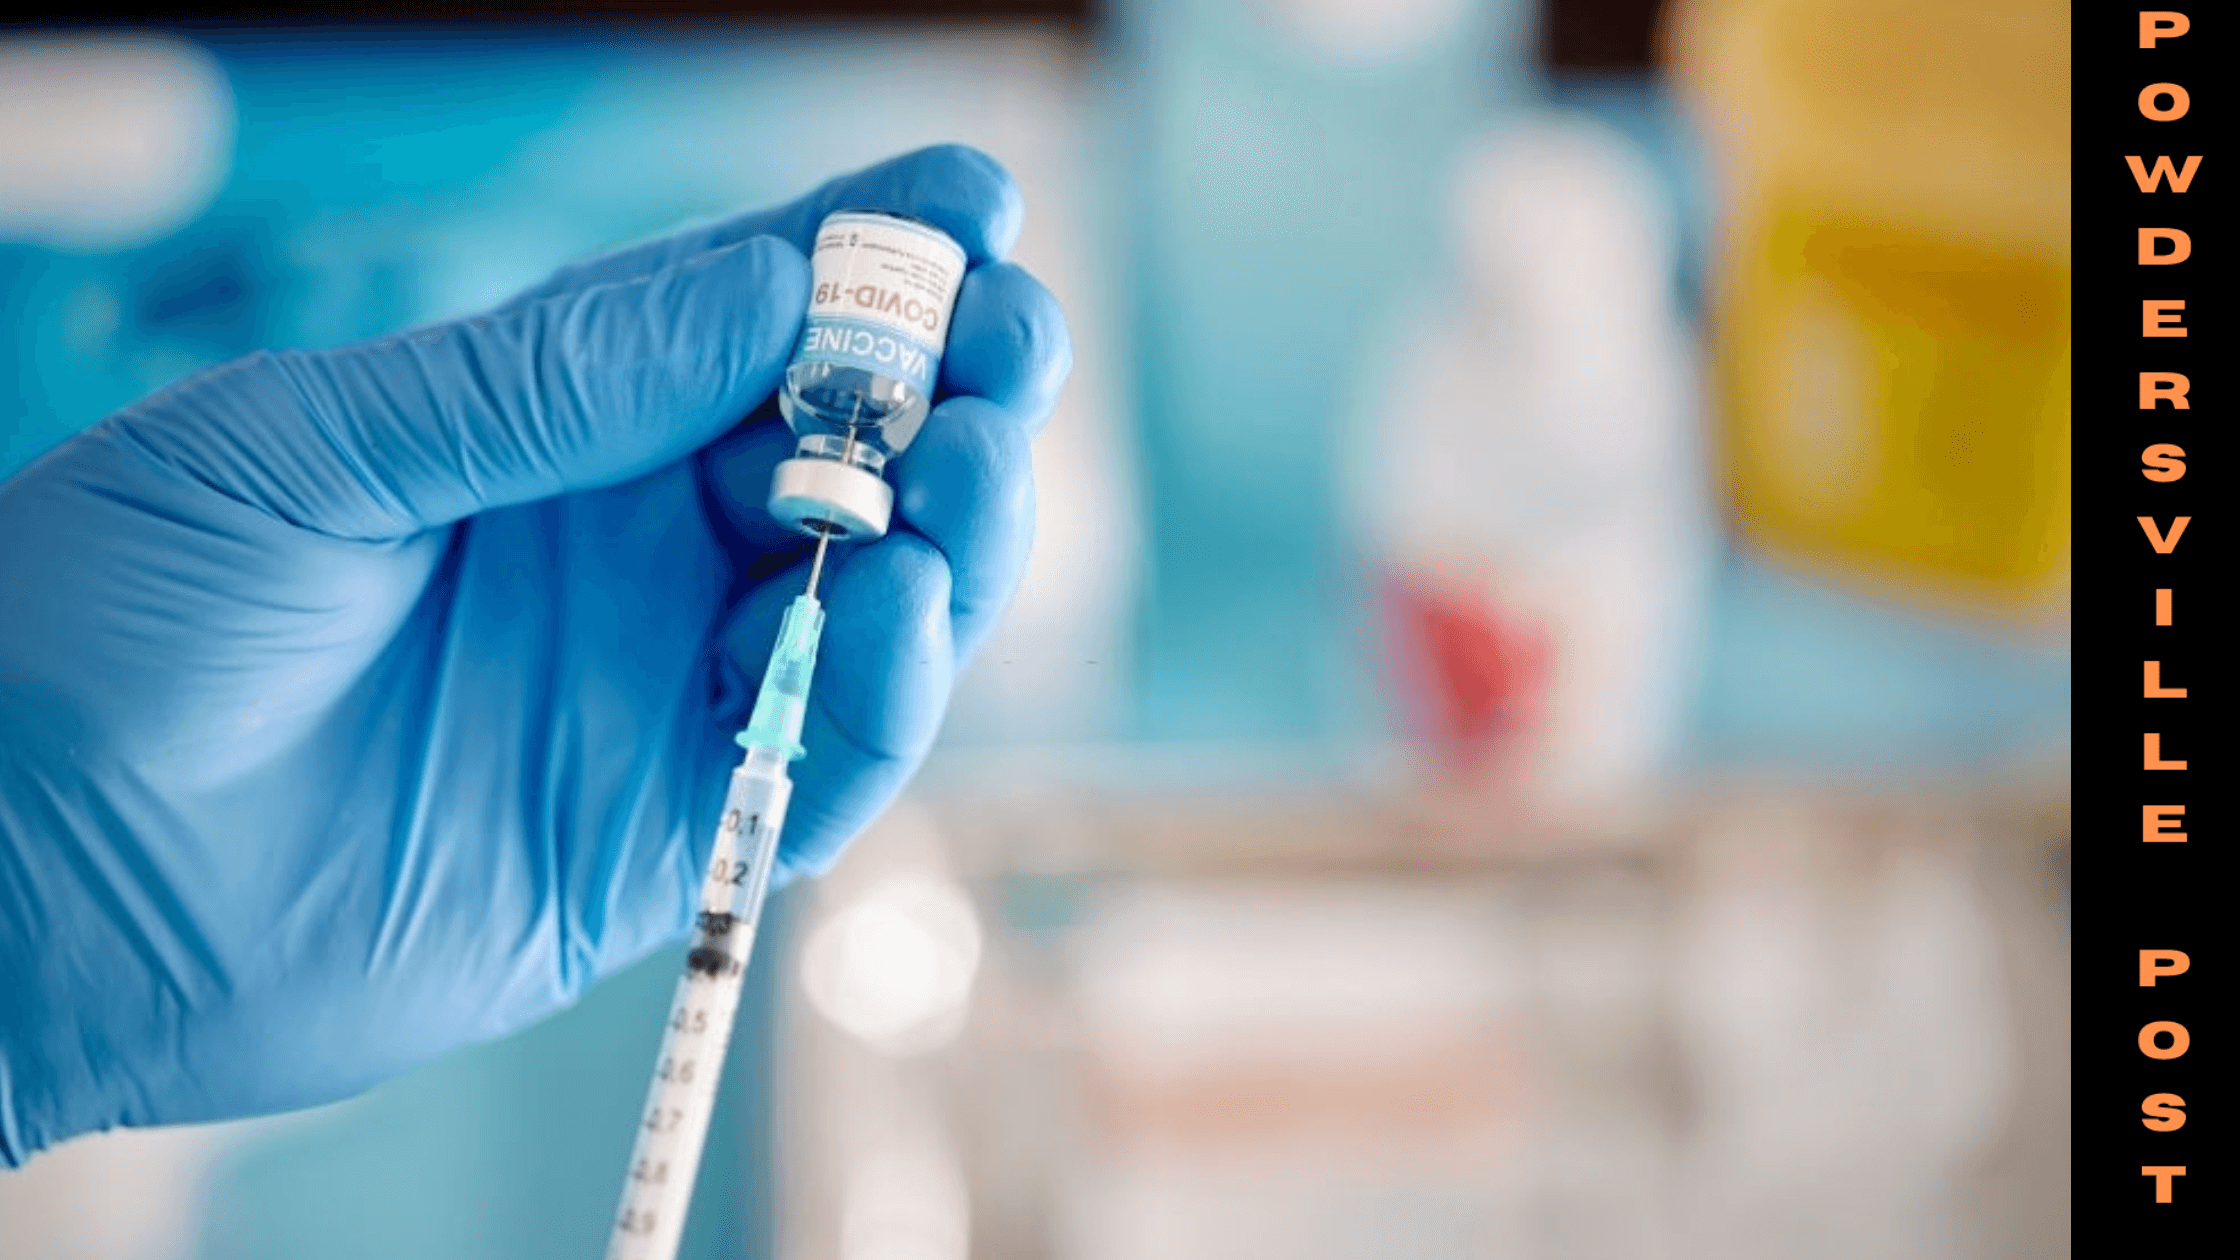 South Africa Comes Out With Own Moderna Vaccine